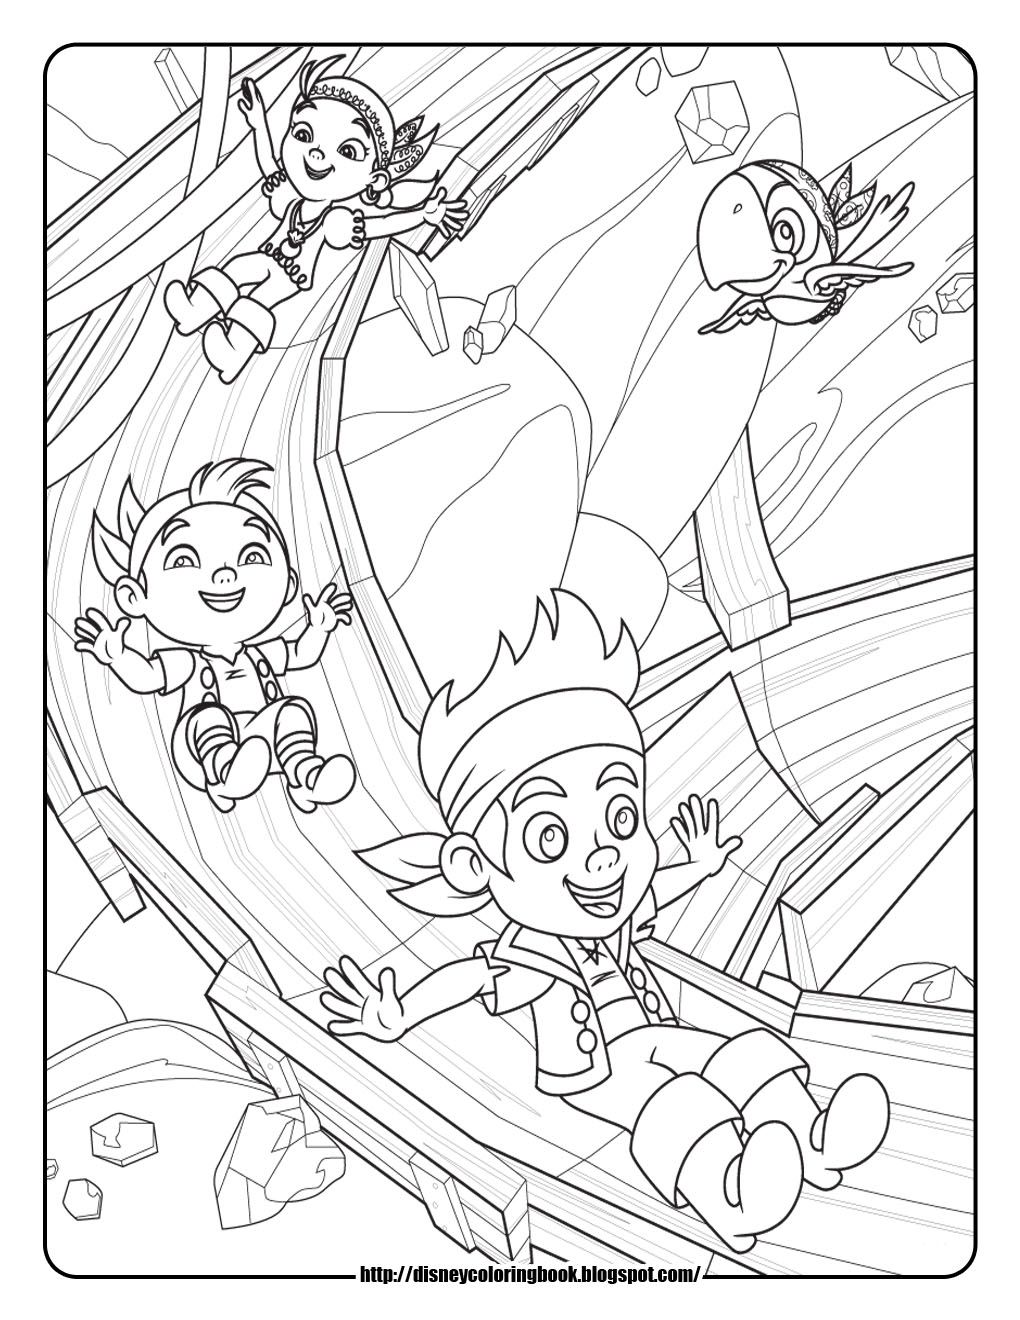 Happy Jake And The Neverland Pirates Coloring Pages #5007 Jake And